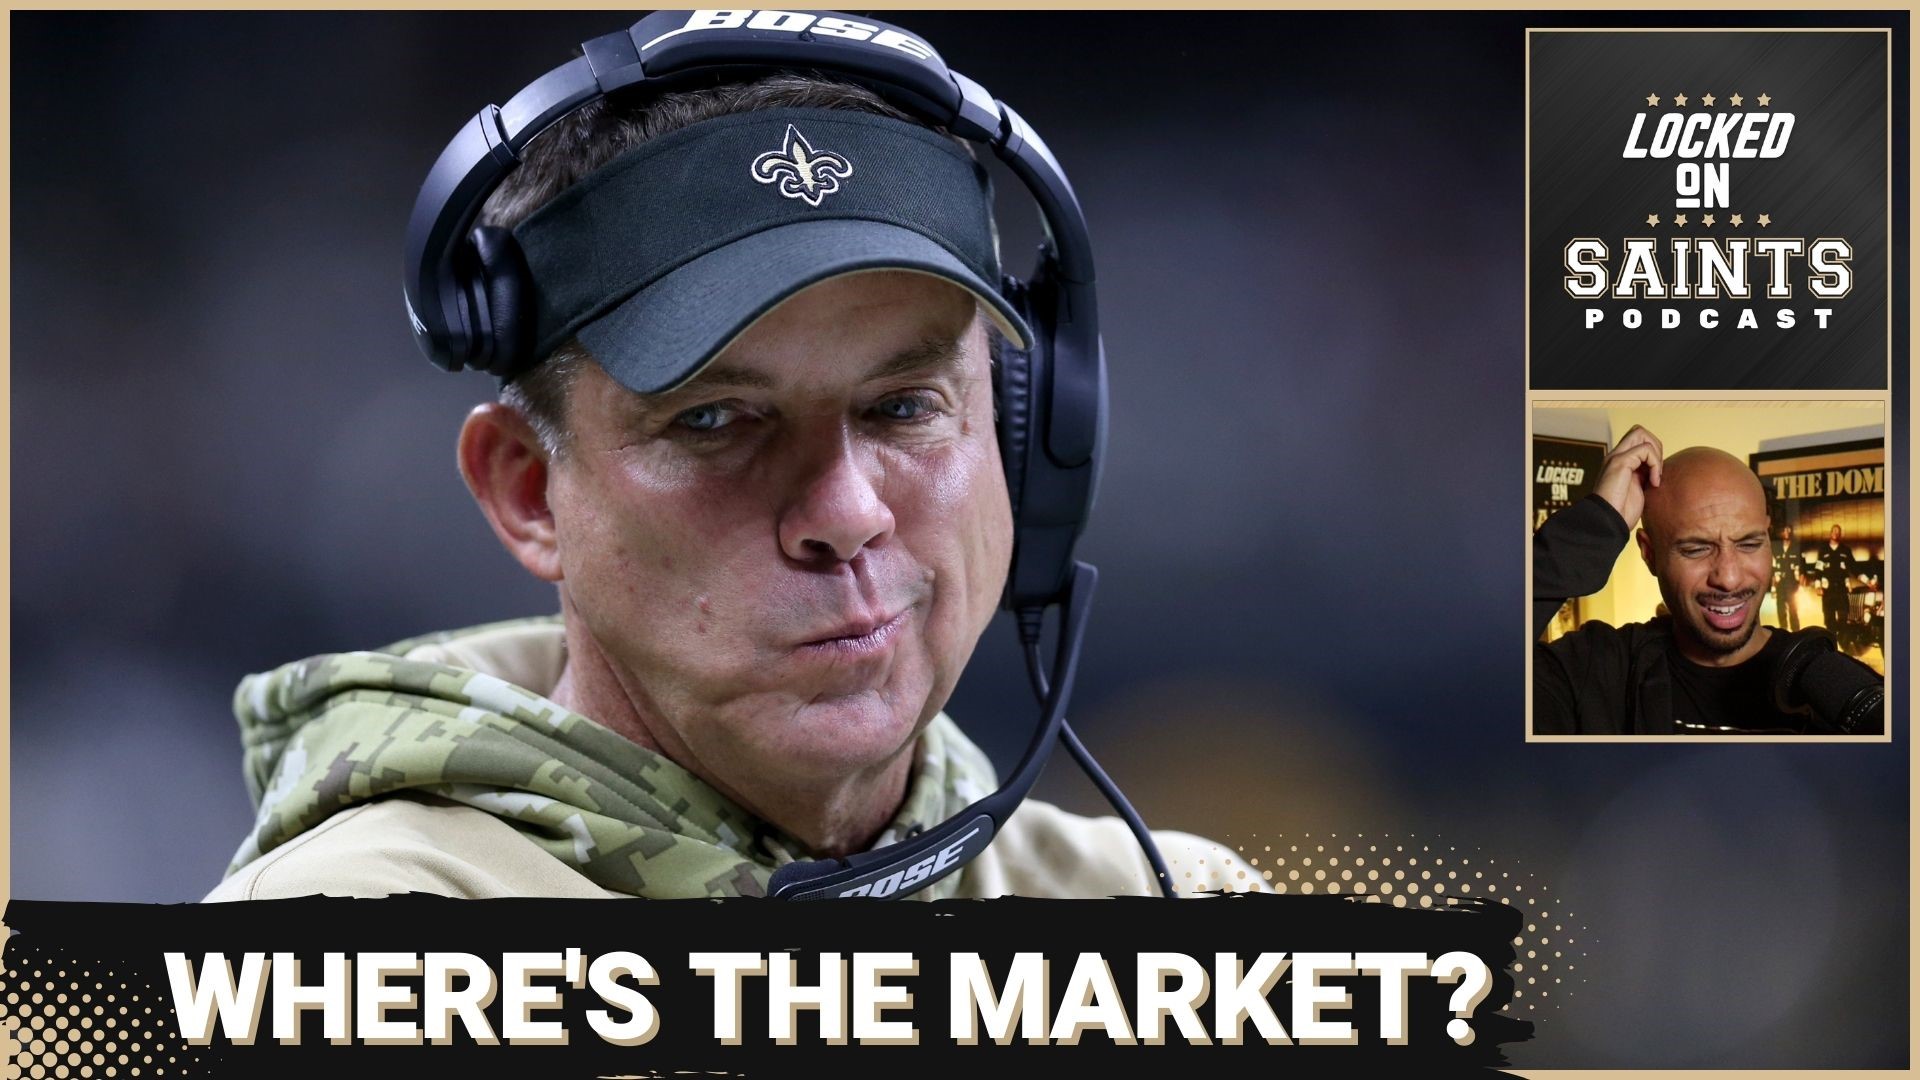 Does Sean Payton have a market or not? The New Orleans Saints want to get some picks back for Payton, conflict reports could be cause for concern.